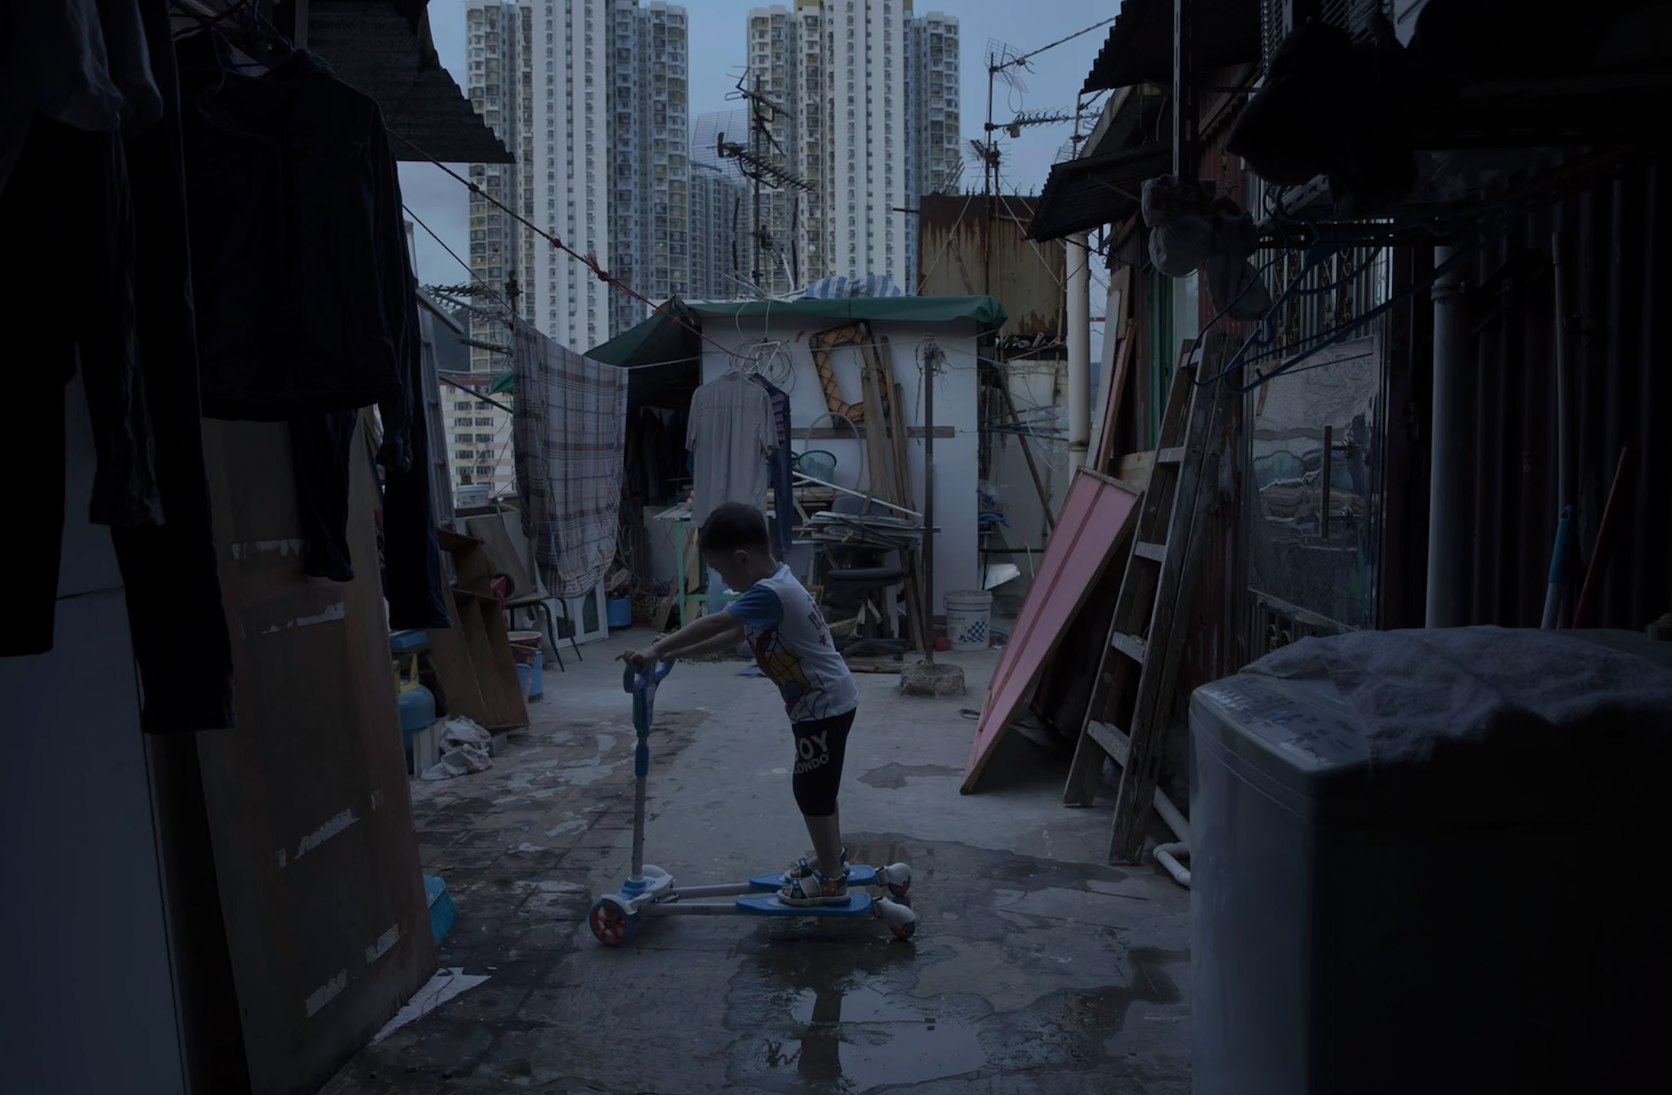 21 People Living in Hong Kong's Tiny 'Coffin Homes'